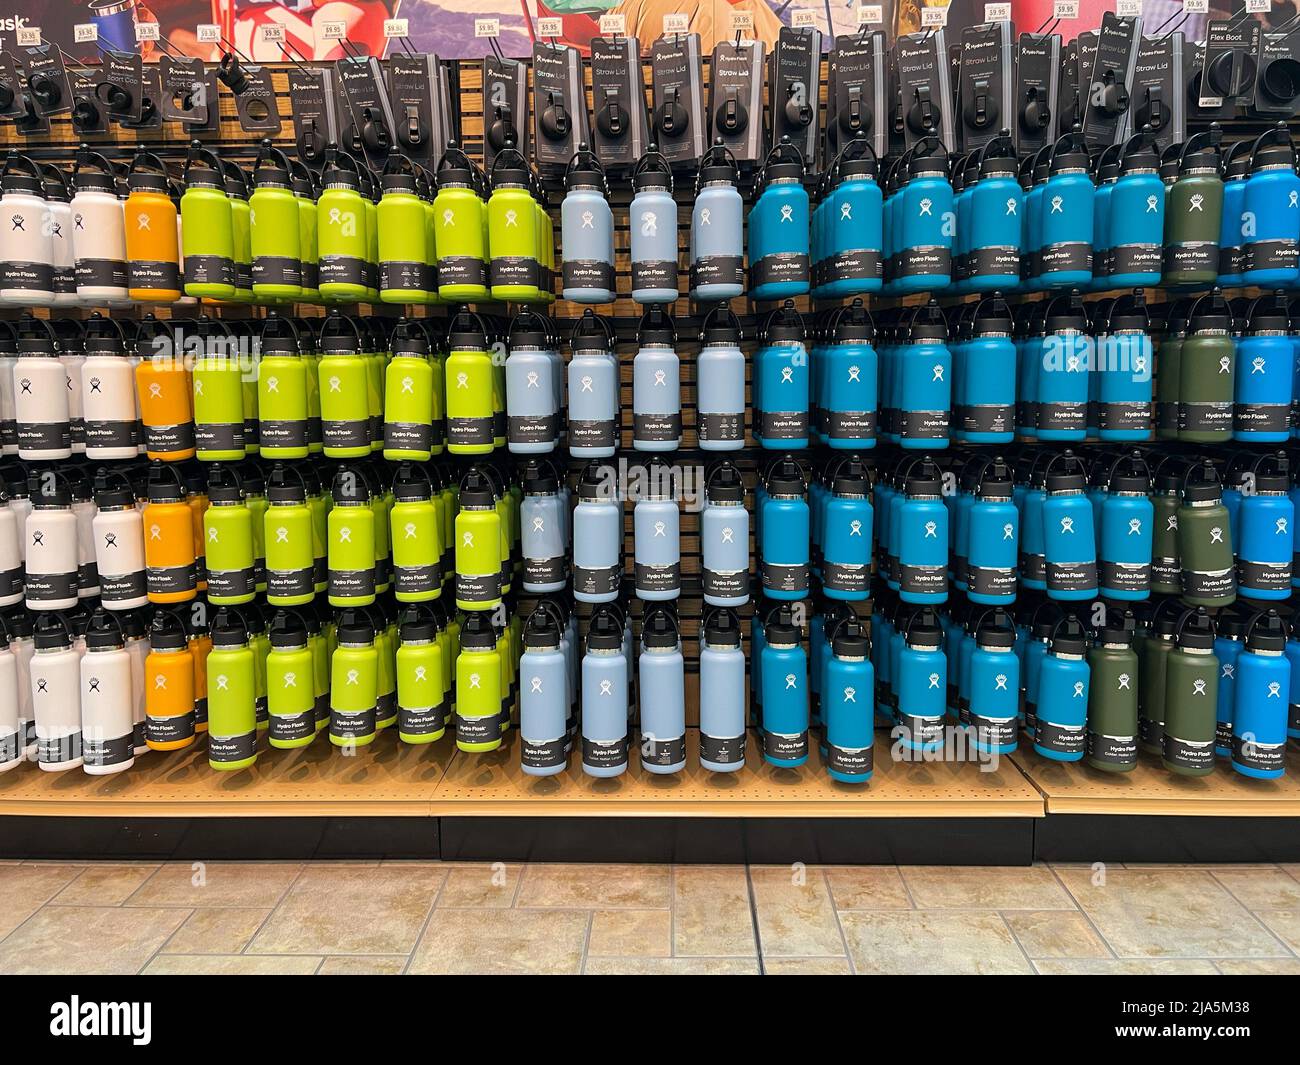 https://c8.alamy.com/comp/2JA5M38/springfield-il-usa-may-2-2022-a-display-of-hydro-flask-reusable-water-bottles-for-sale-at-the-scheels-sporting-goods-store-in-springfield-illino-2JA5M38.jpg